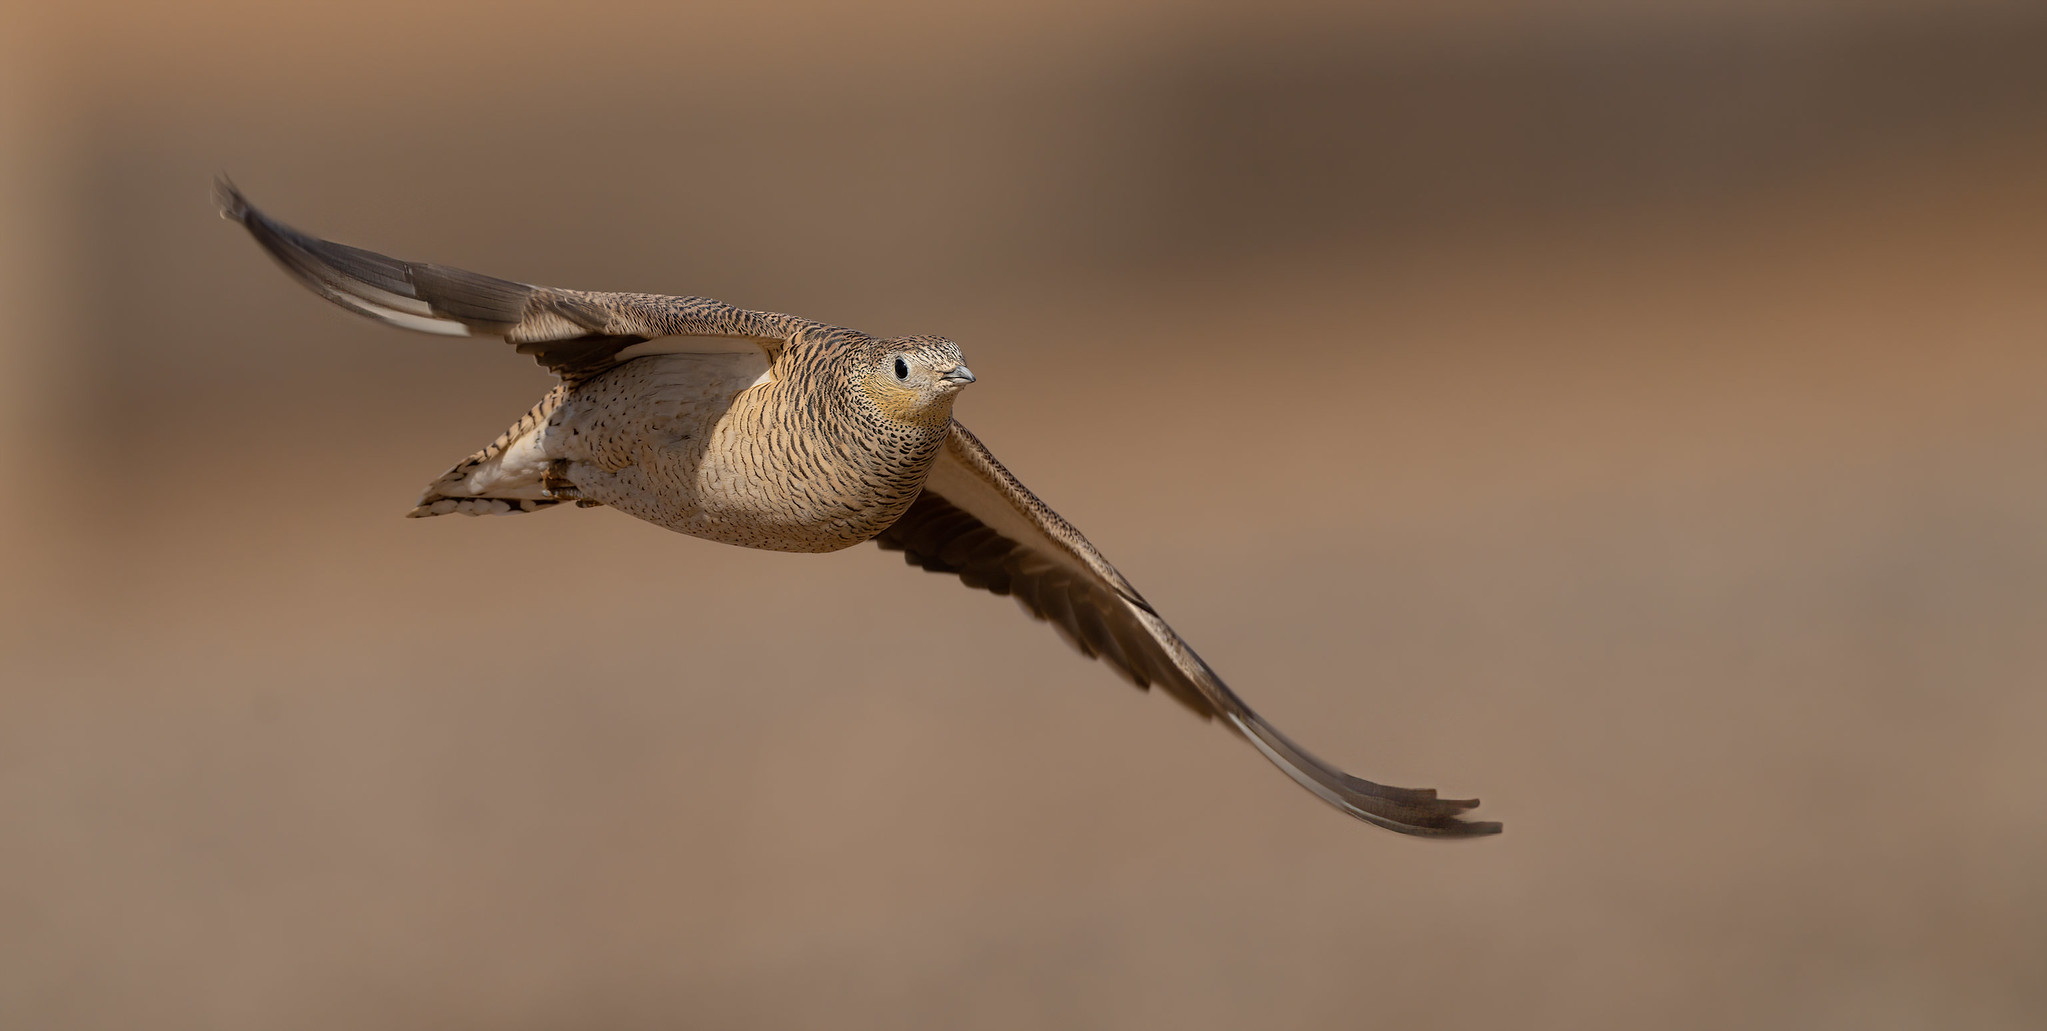 Crowned Sandgrouse female on take-off